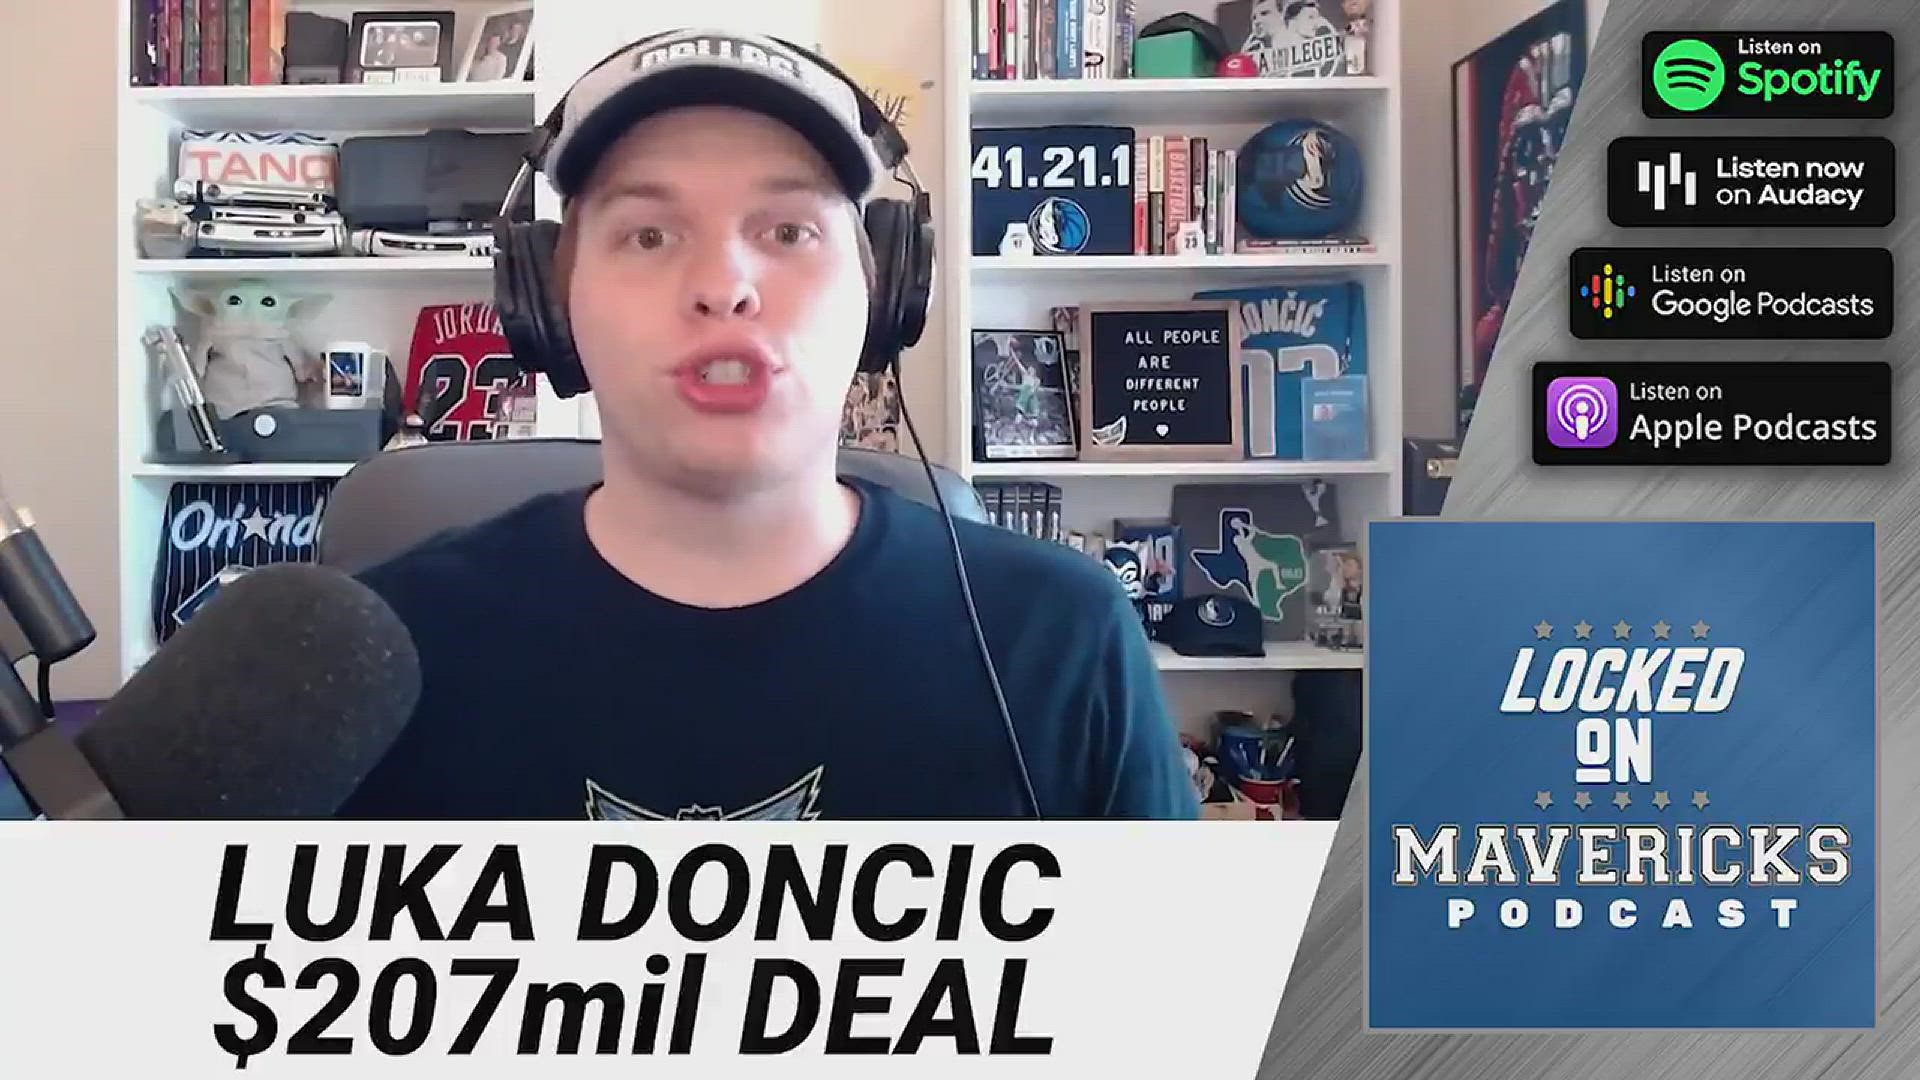 Luka Doncic has reportedly agreed to a supermax extension with the Mavs, but why should we care?